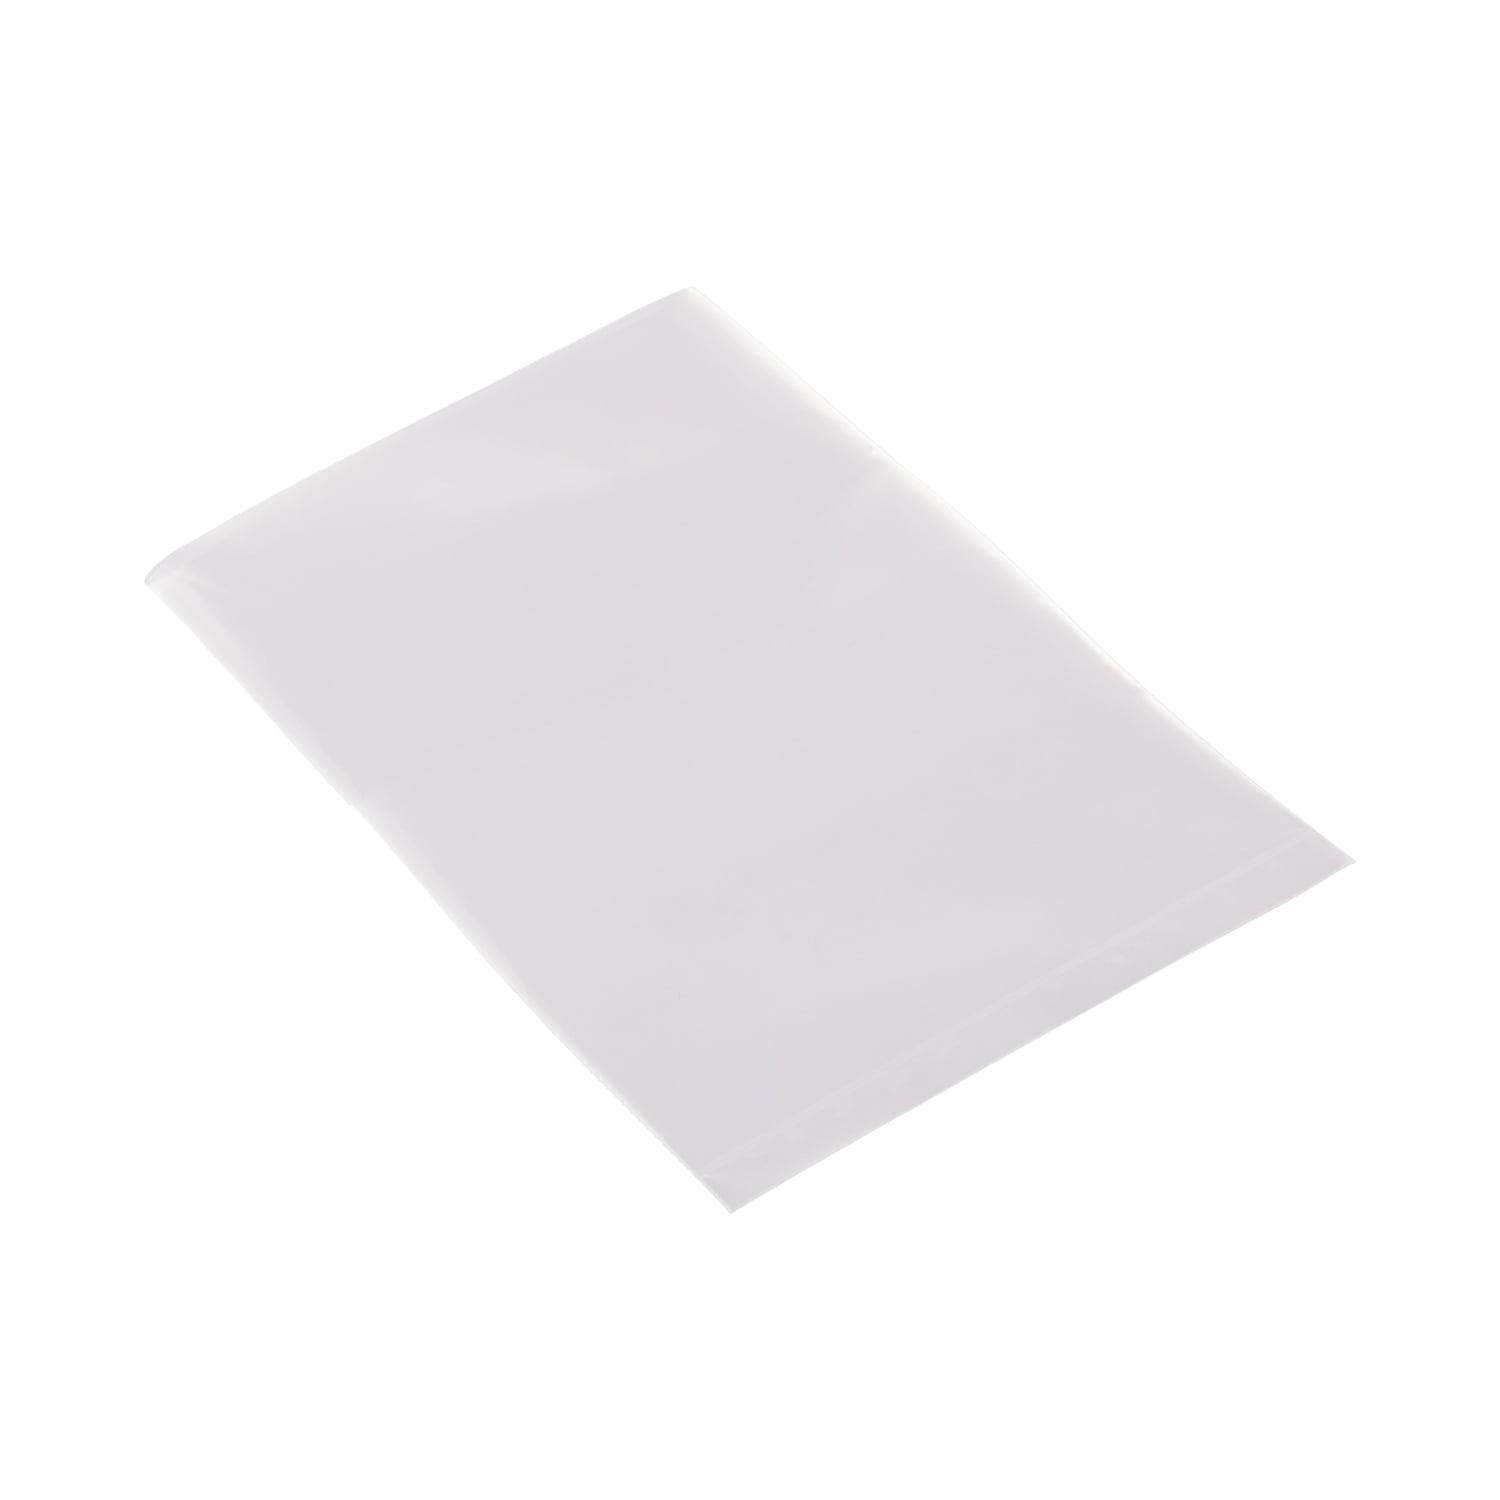 Party Favors Proving Baking Supplies Apparel Packaging Owlpack Clear 1.5 Mil Poly Bags with Open End 8 x 15 Inches, Pack of 1000 